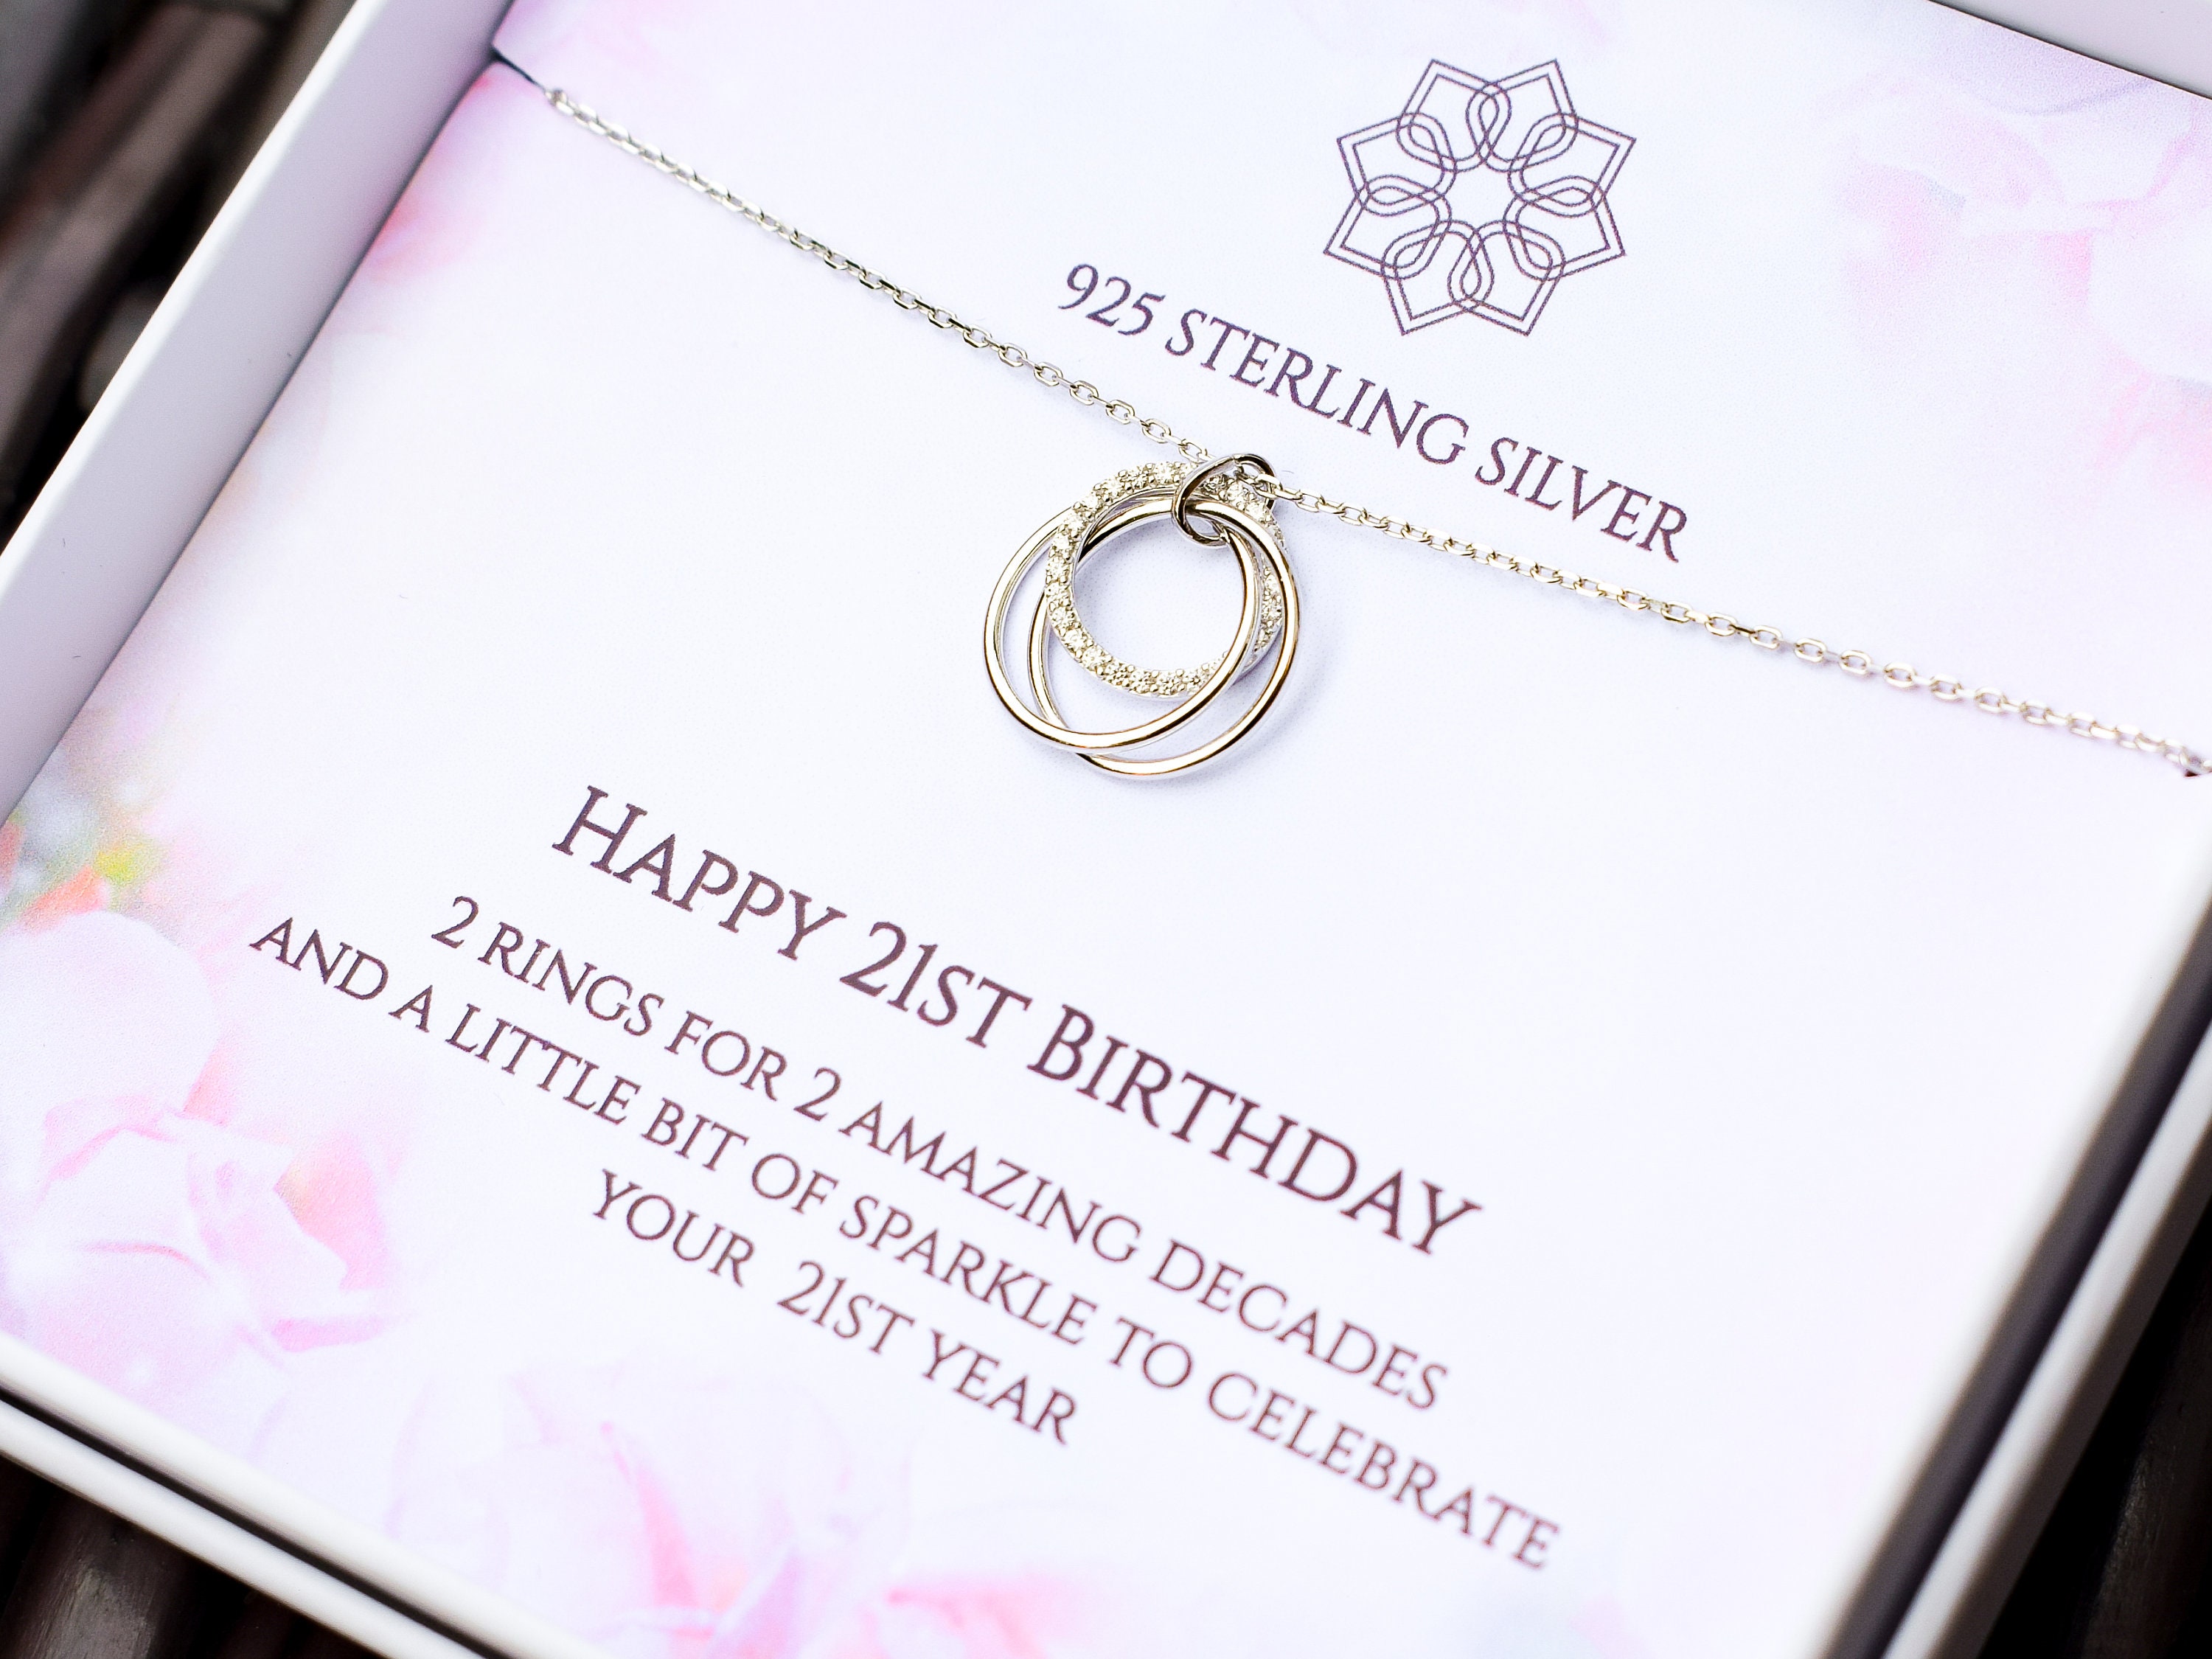 21st birthday necklace gift silver plated chain diamante friend family daughter 